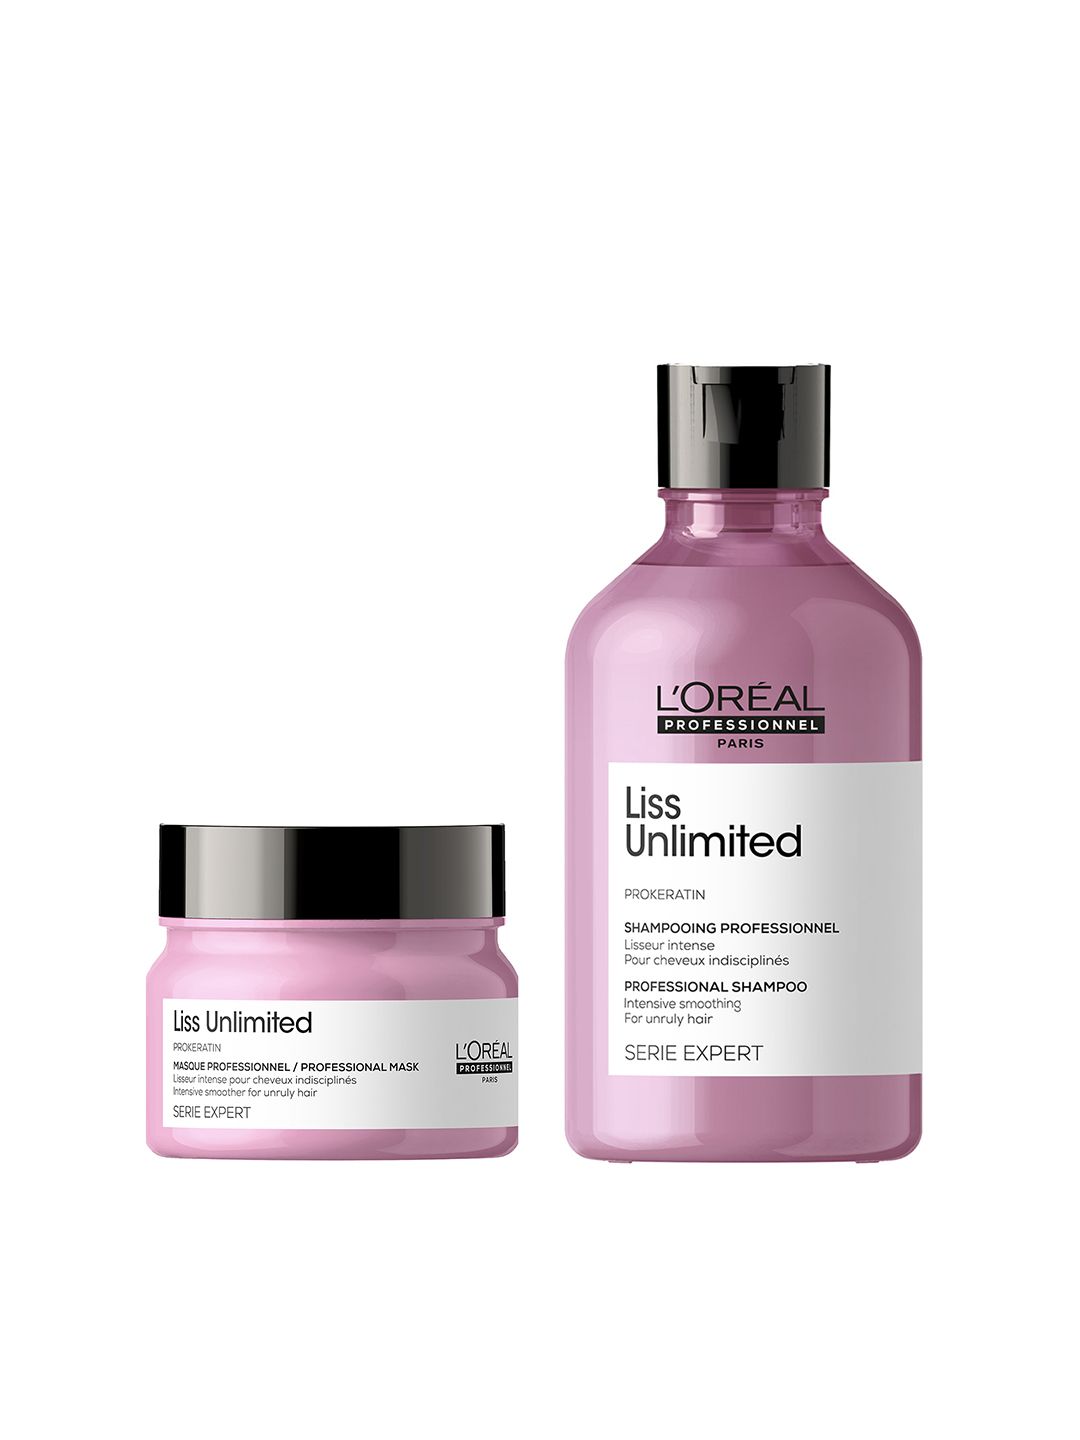 LOreal Professionnel Set of Liss Unlimited Shampoo & Masque Price in India